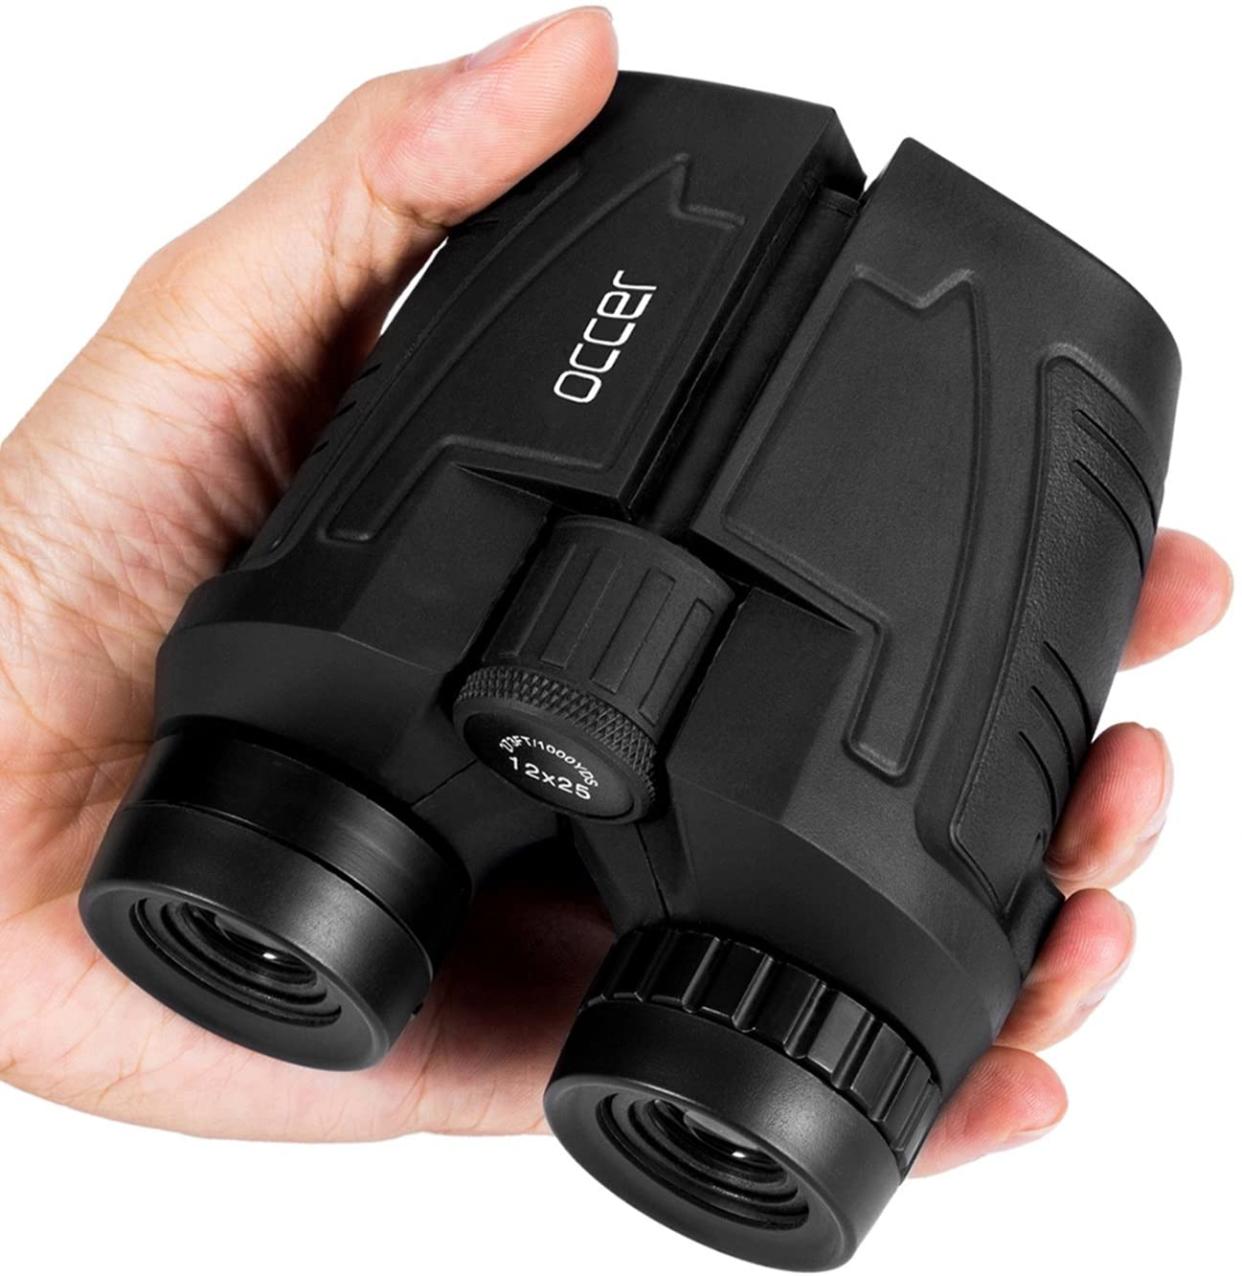 Occer 12x25 Compact Binoculars, best gifts for dad 